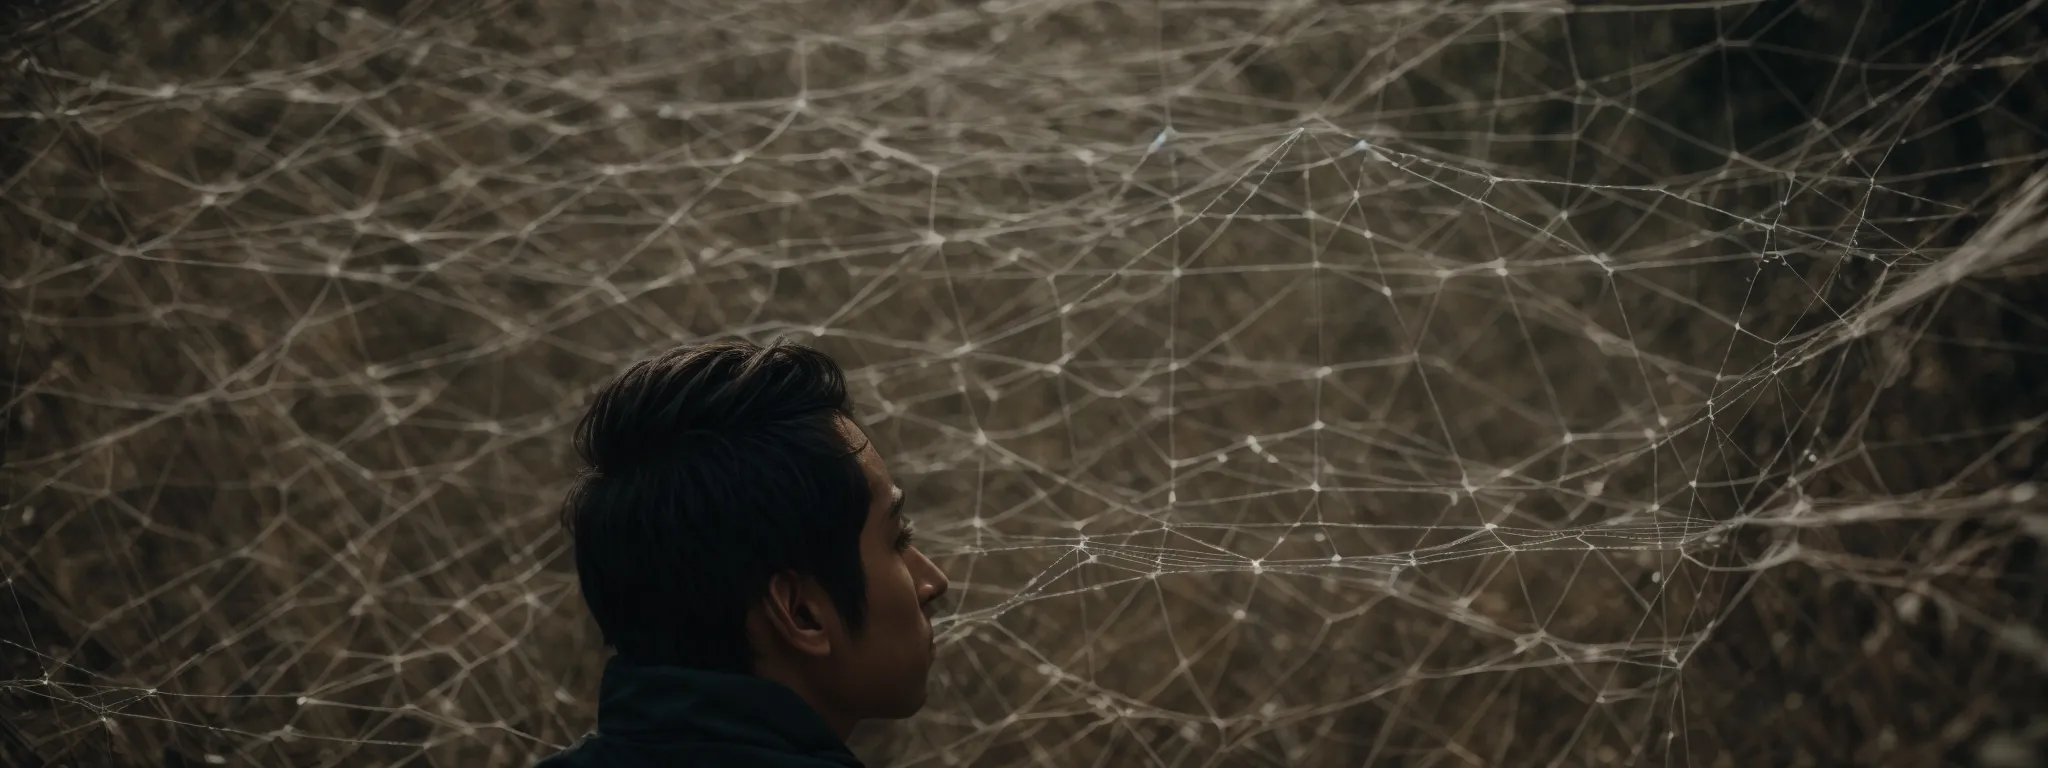 a webmaster examines a complex web of interconnected nodes representing a website’s structure and backlink network.